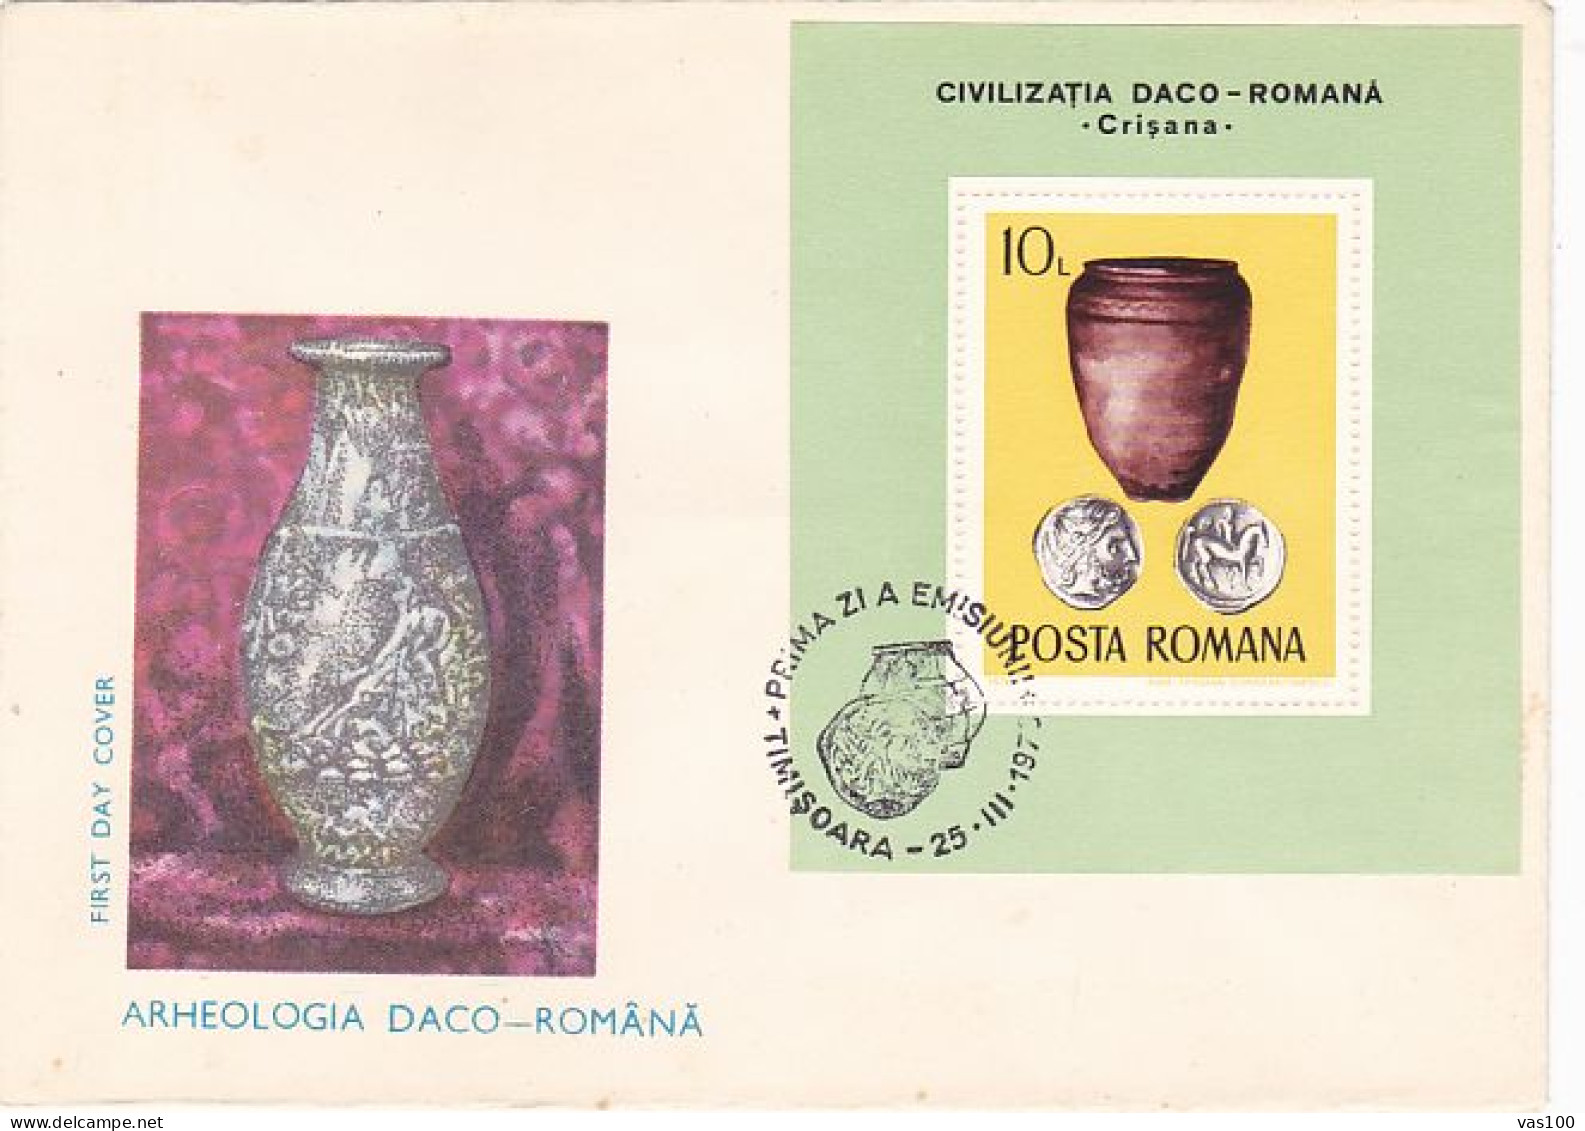 ARCHAEOLOGY, ANCIENT DACIAN AND ROMAN RELICS, COVER FDC, 1976, ROMANIA - Archäologie